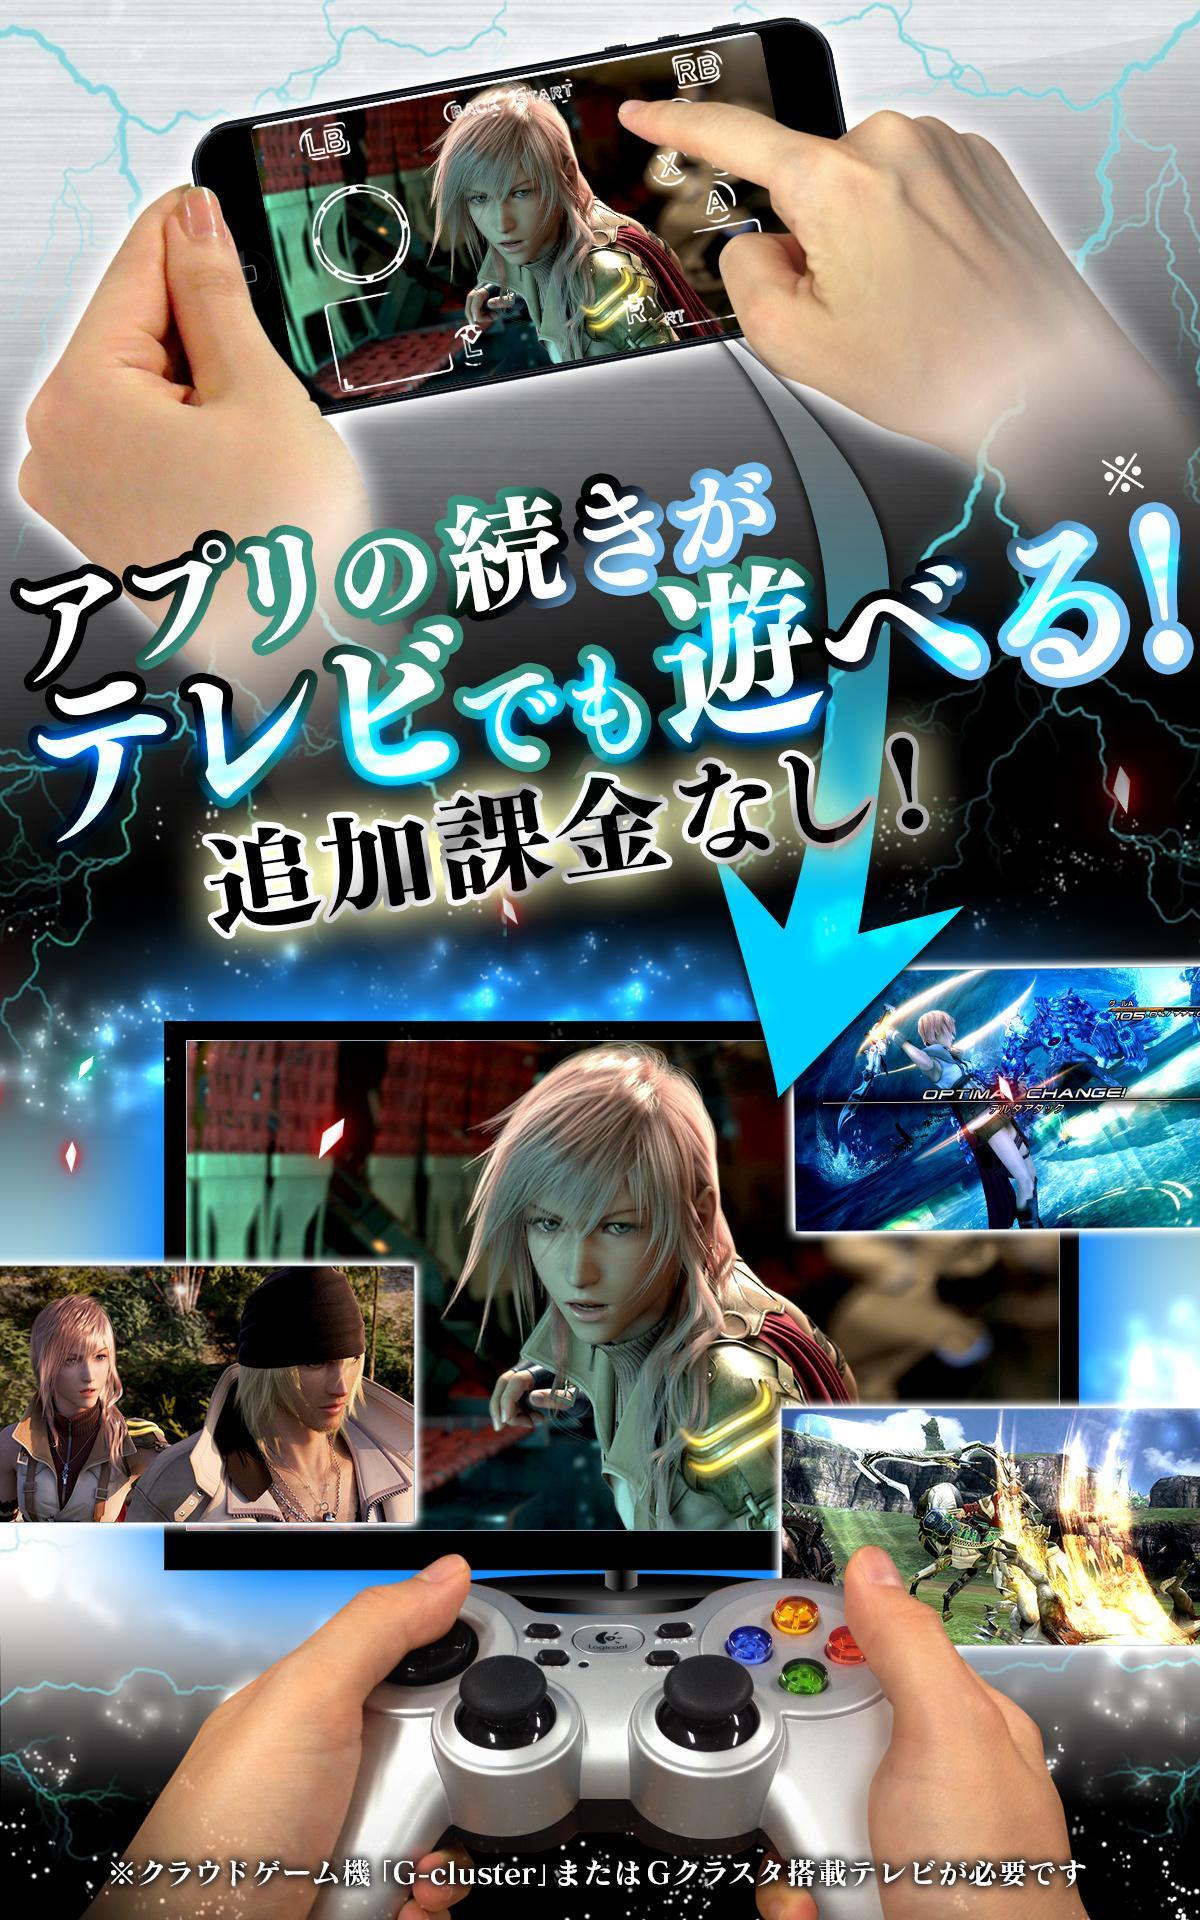 Final Fantasy Xiii For Android Apk Download